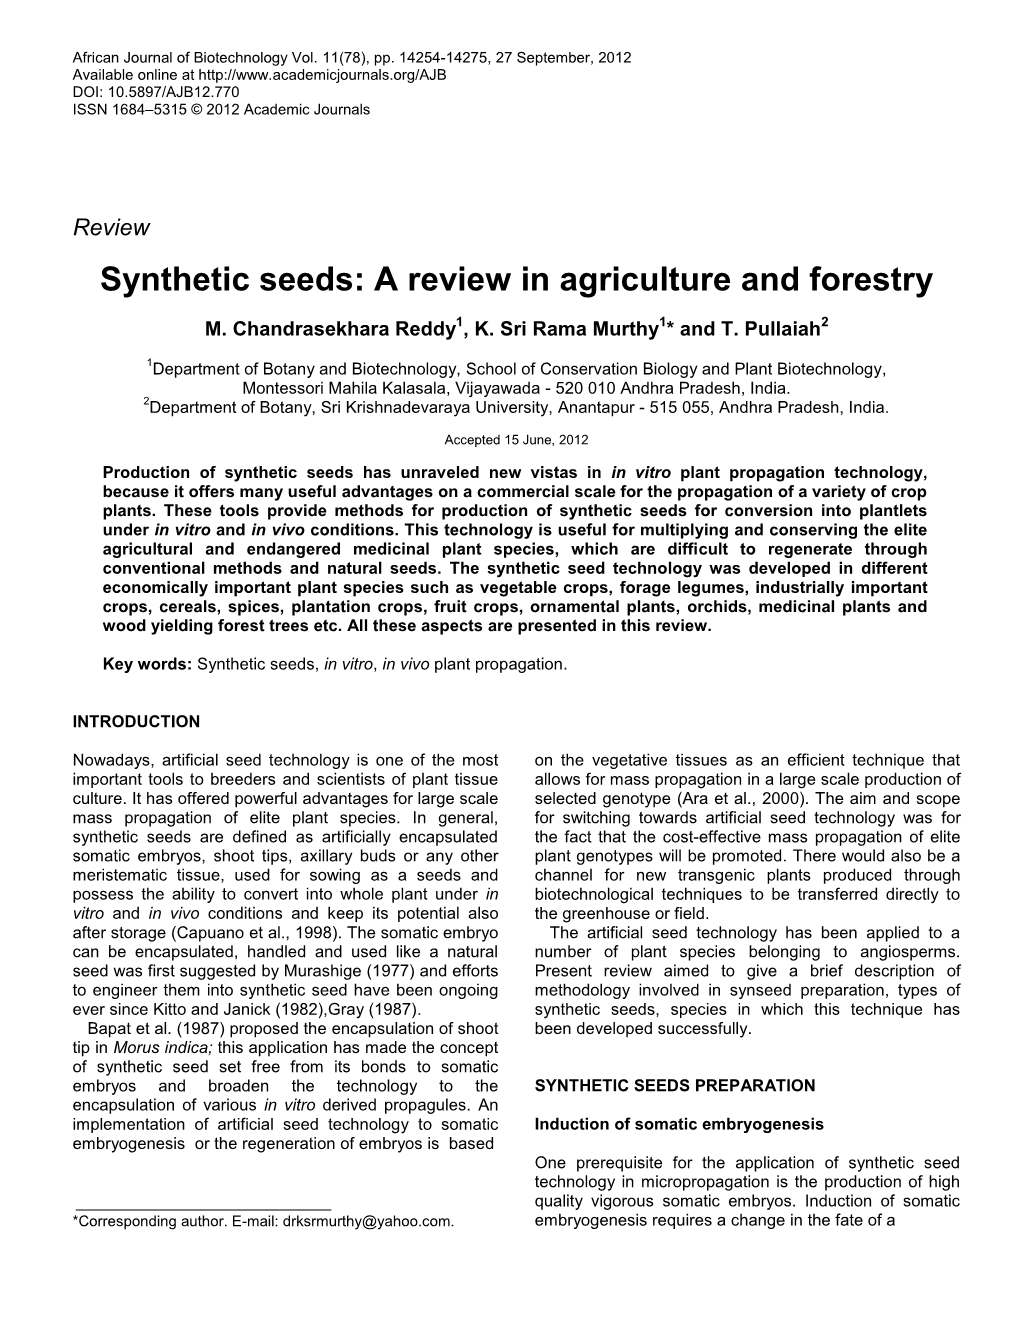 Synthetic Seeds: a Review in Agriculture and Forestry